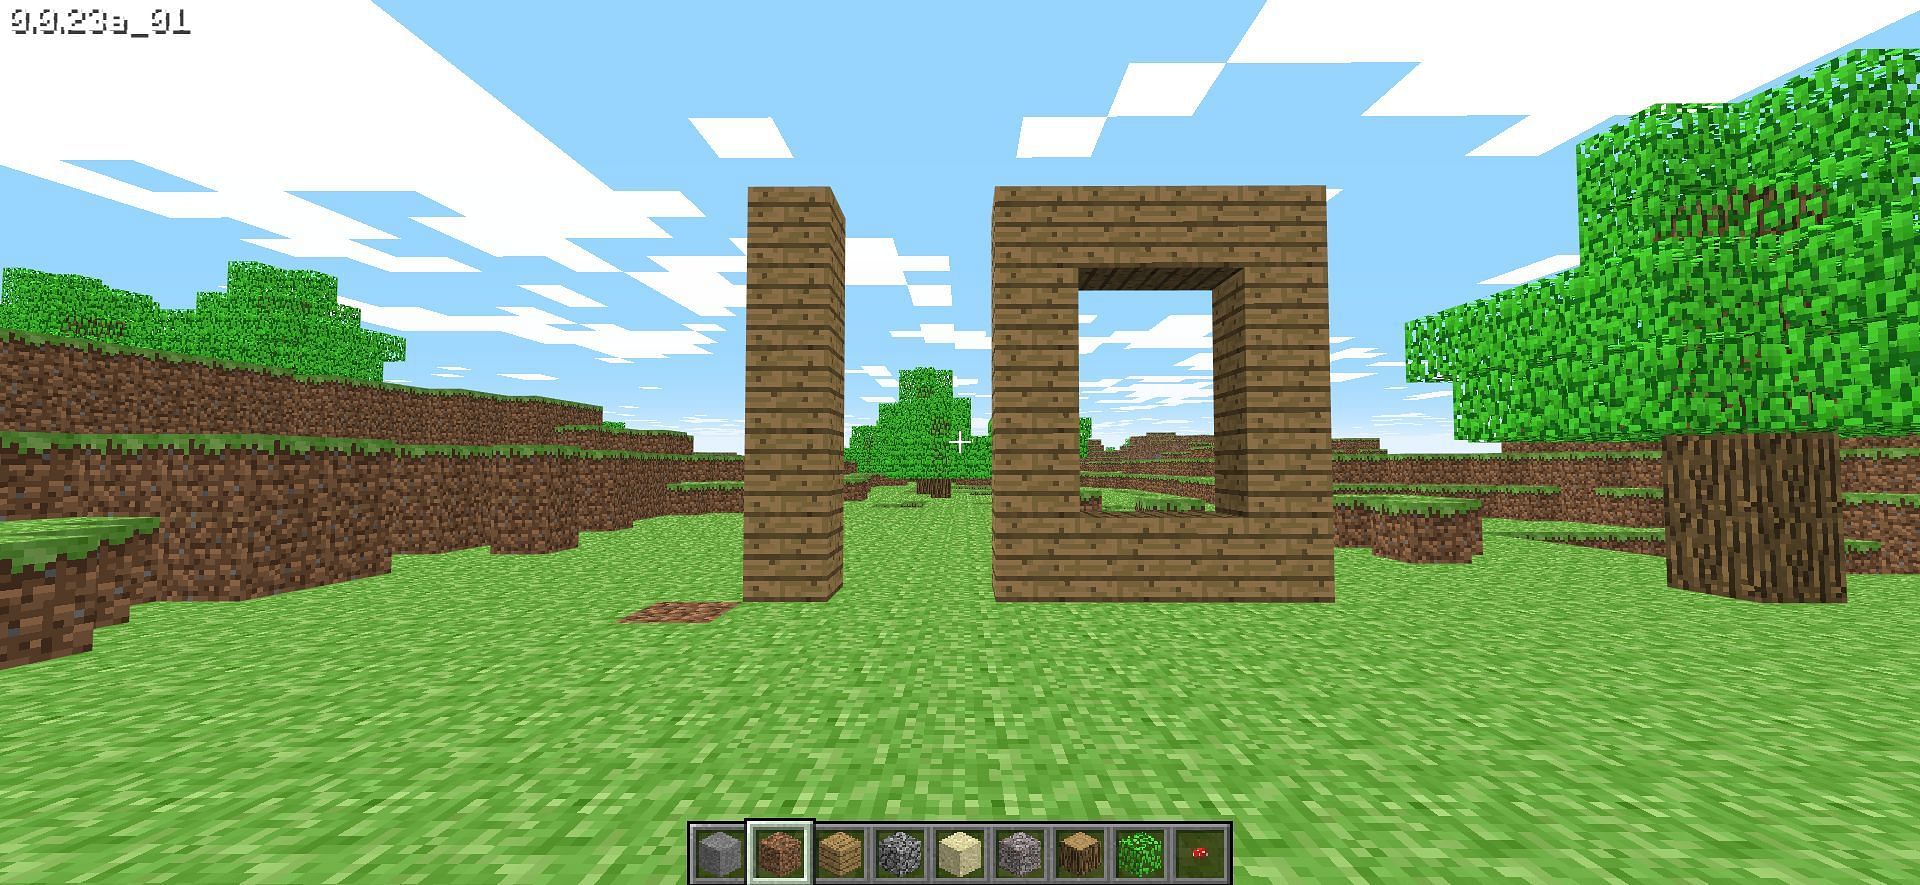 Minecraft Classic was announced for the ten year anniversary of the game. Image via Minecraft